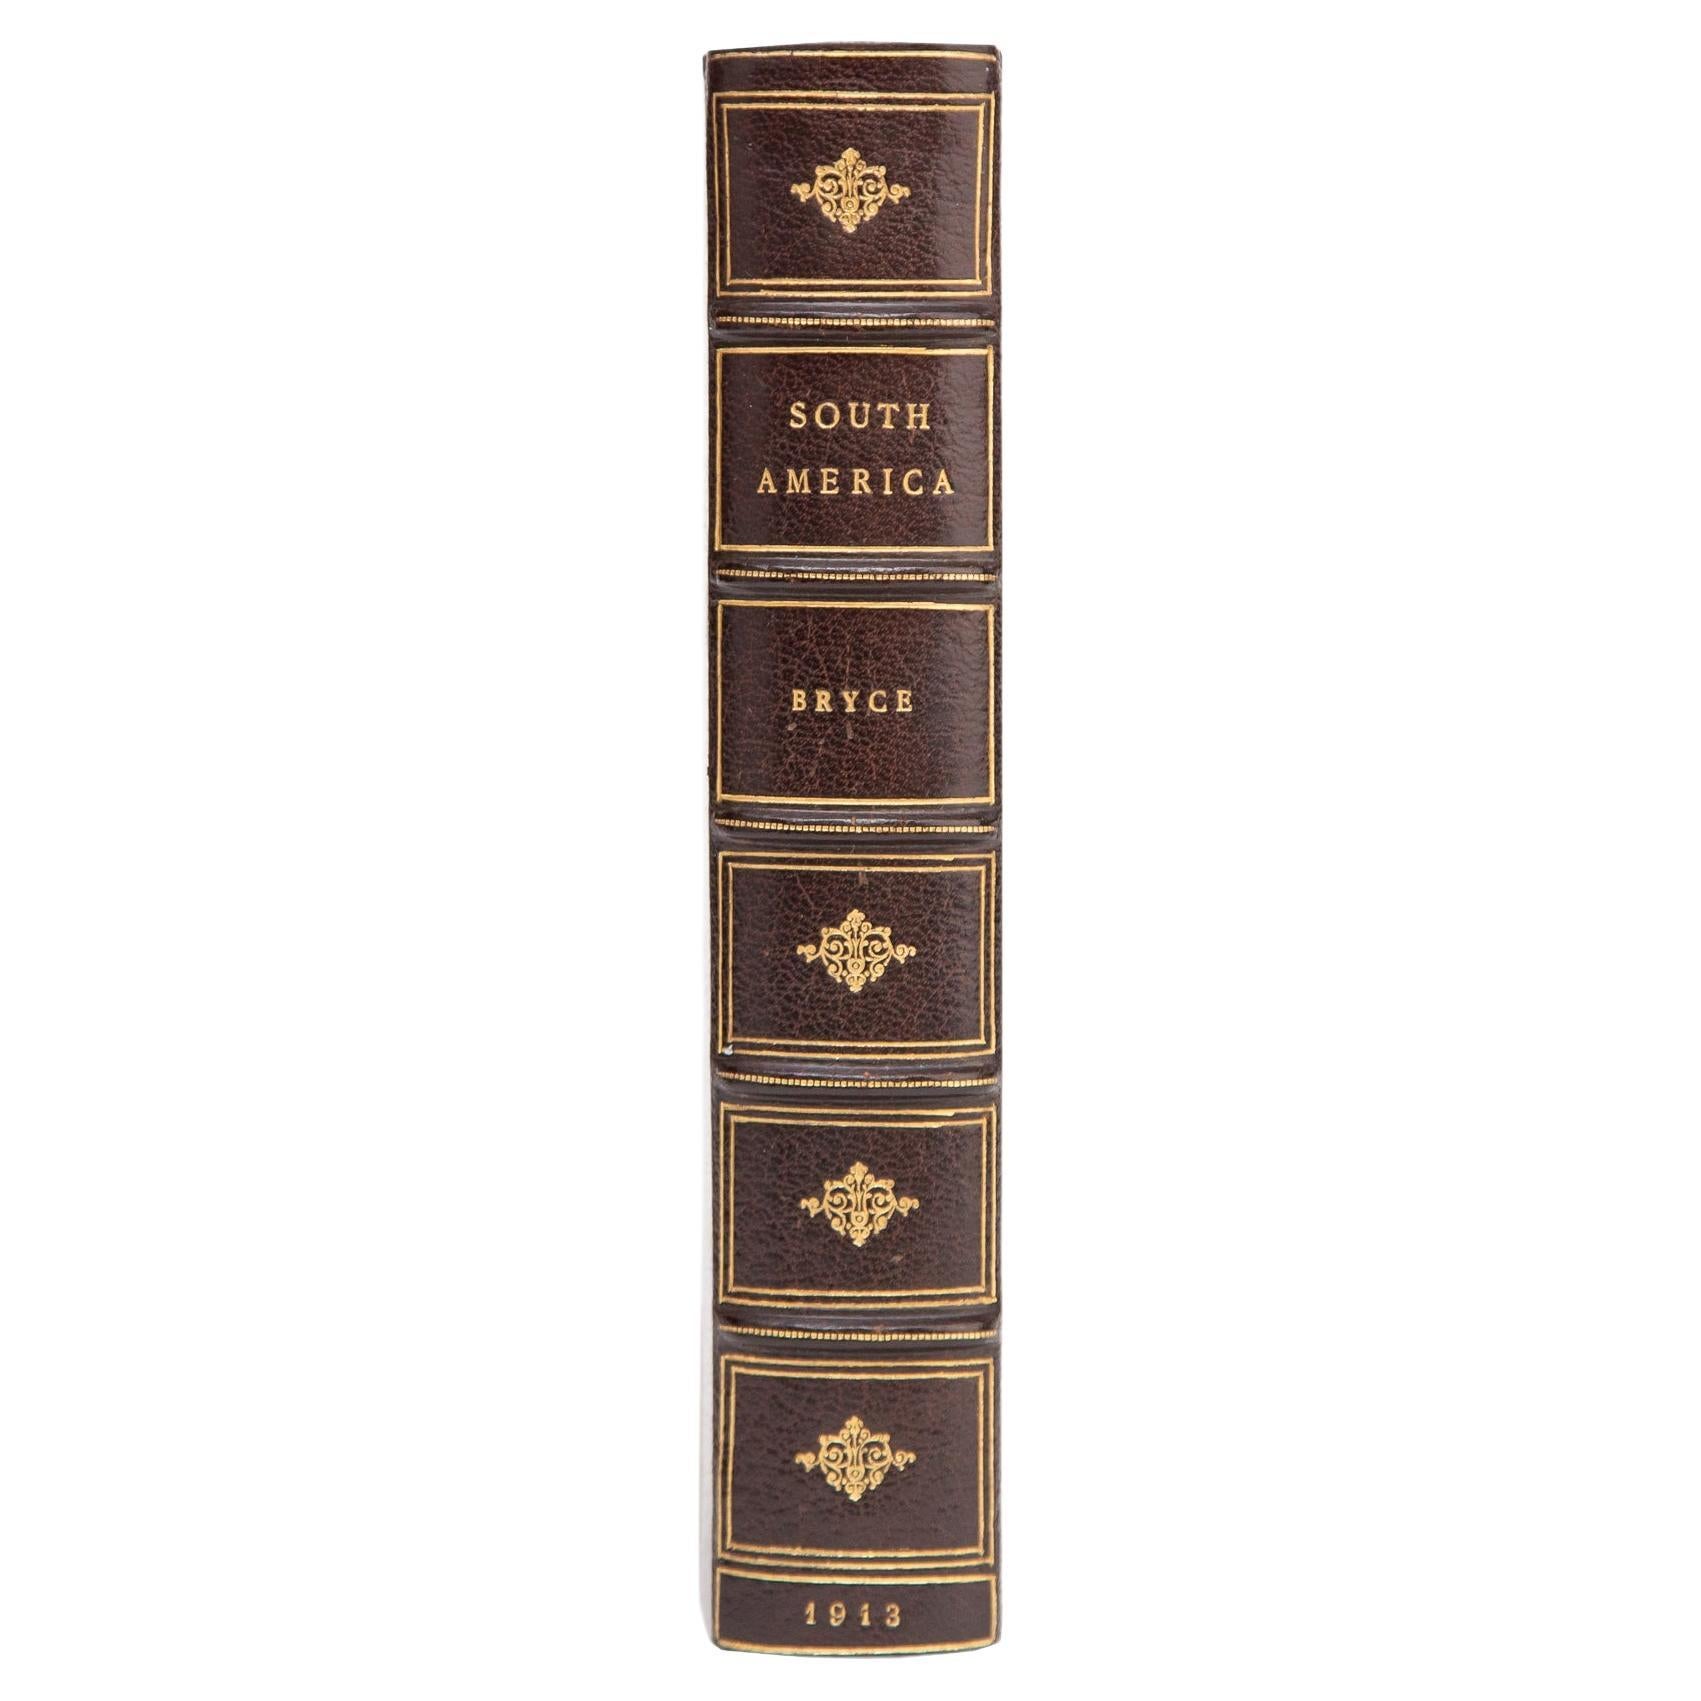 1 Volume, James Bryce, South America, Observations & Impressions